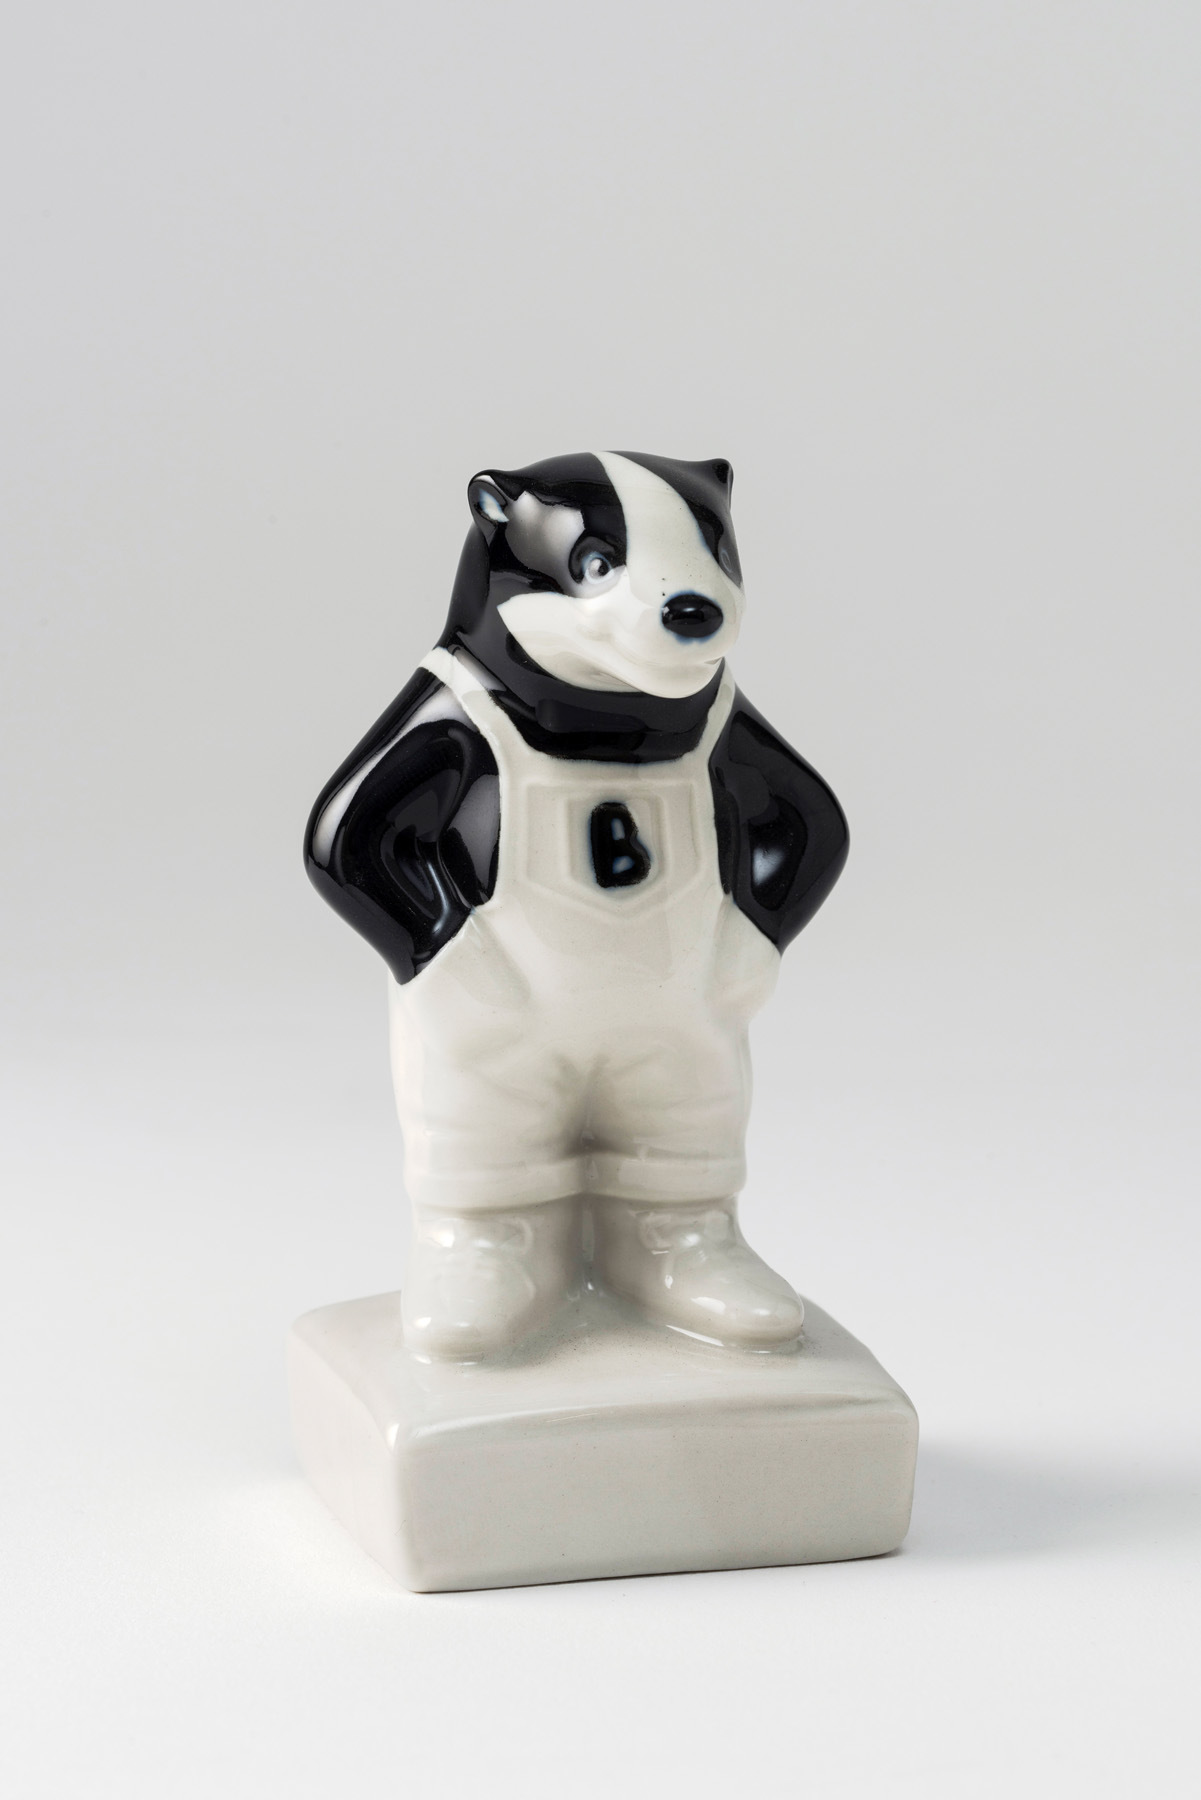 Colour photograph of a small black and white porcelain figurine of a badger wearing white sleeveless dungarees with a letter B in black on the front.